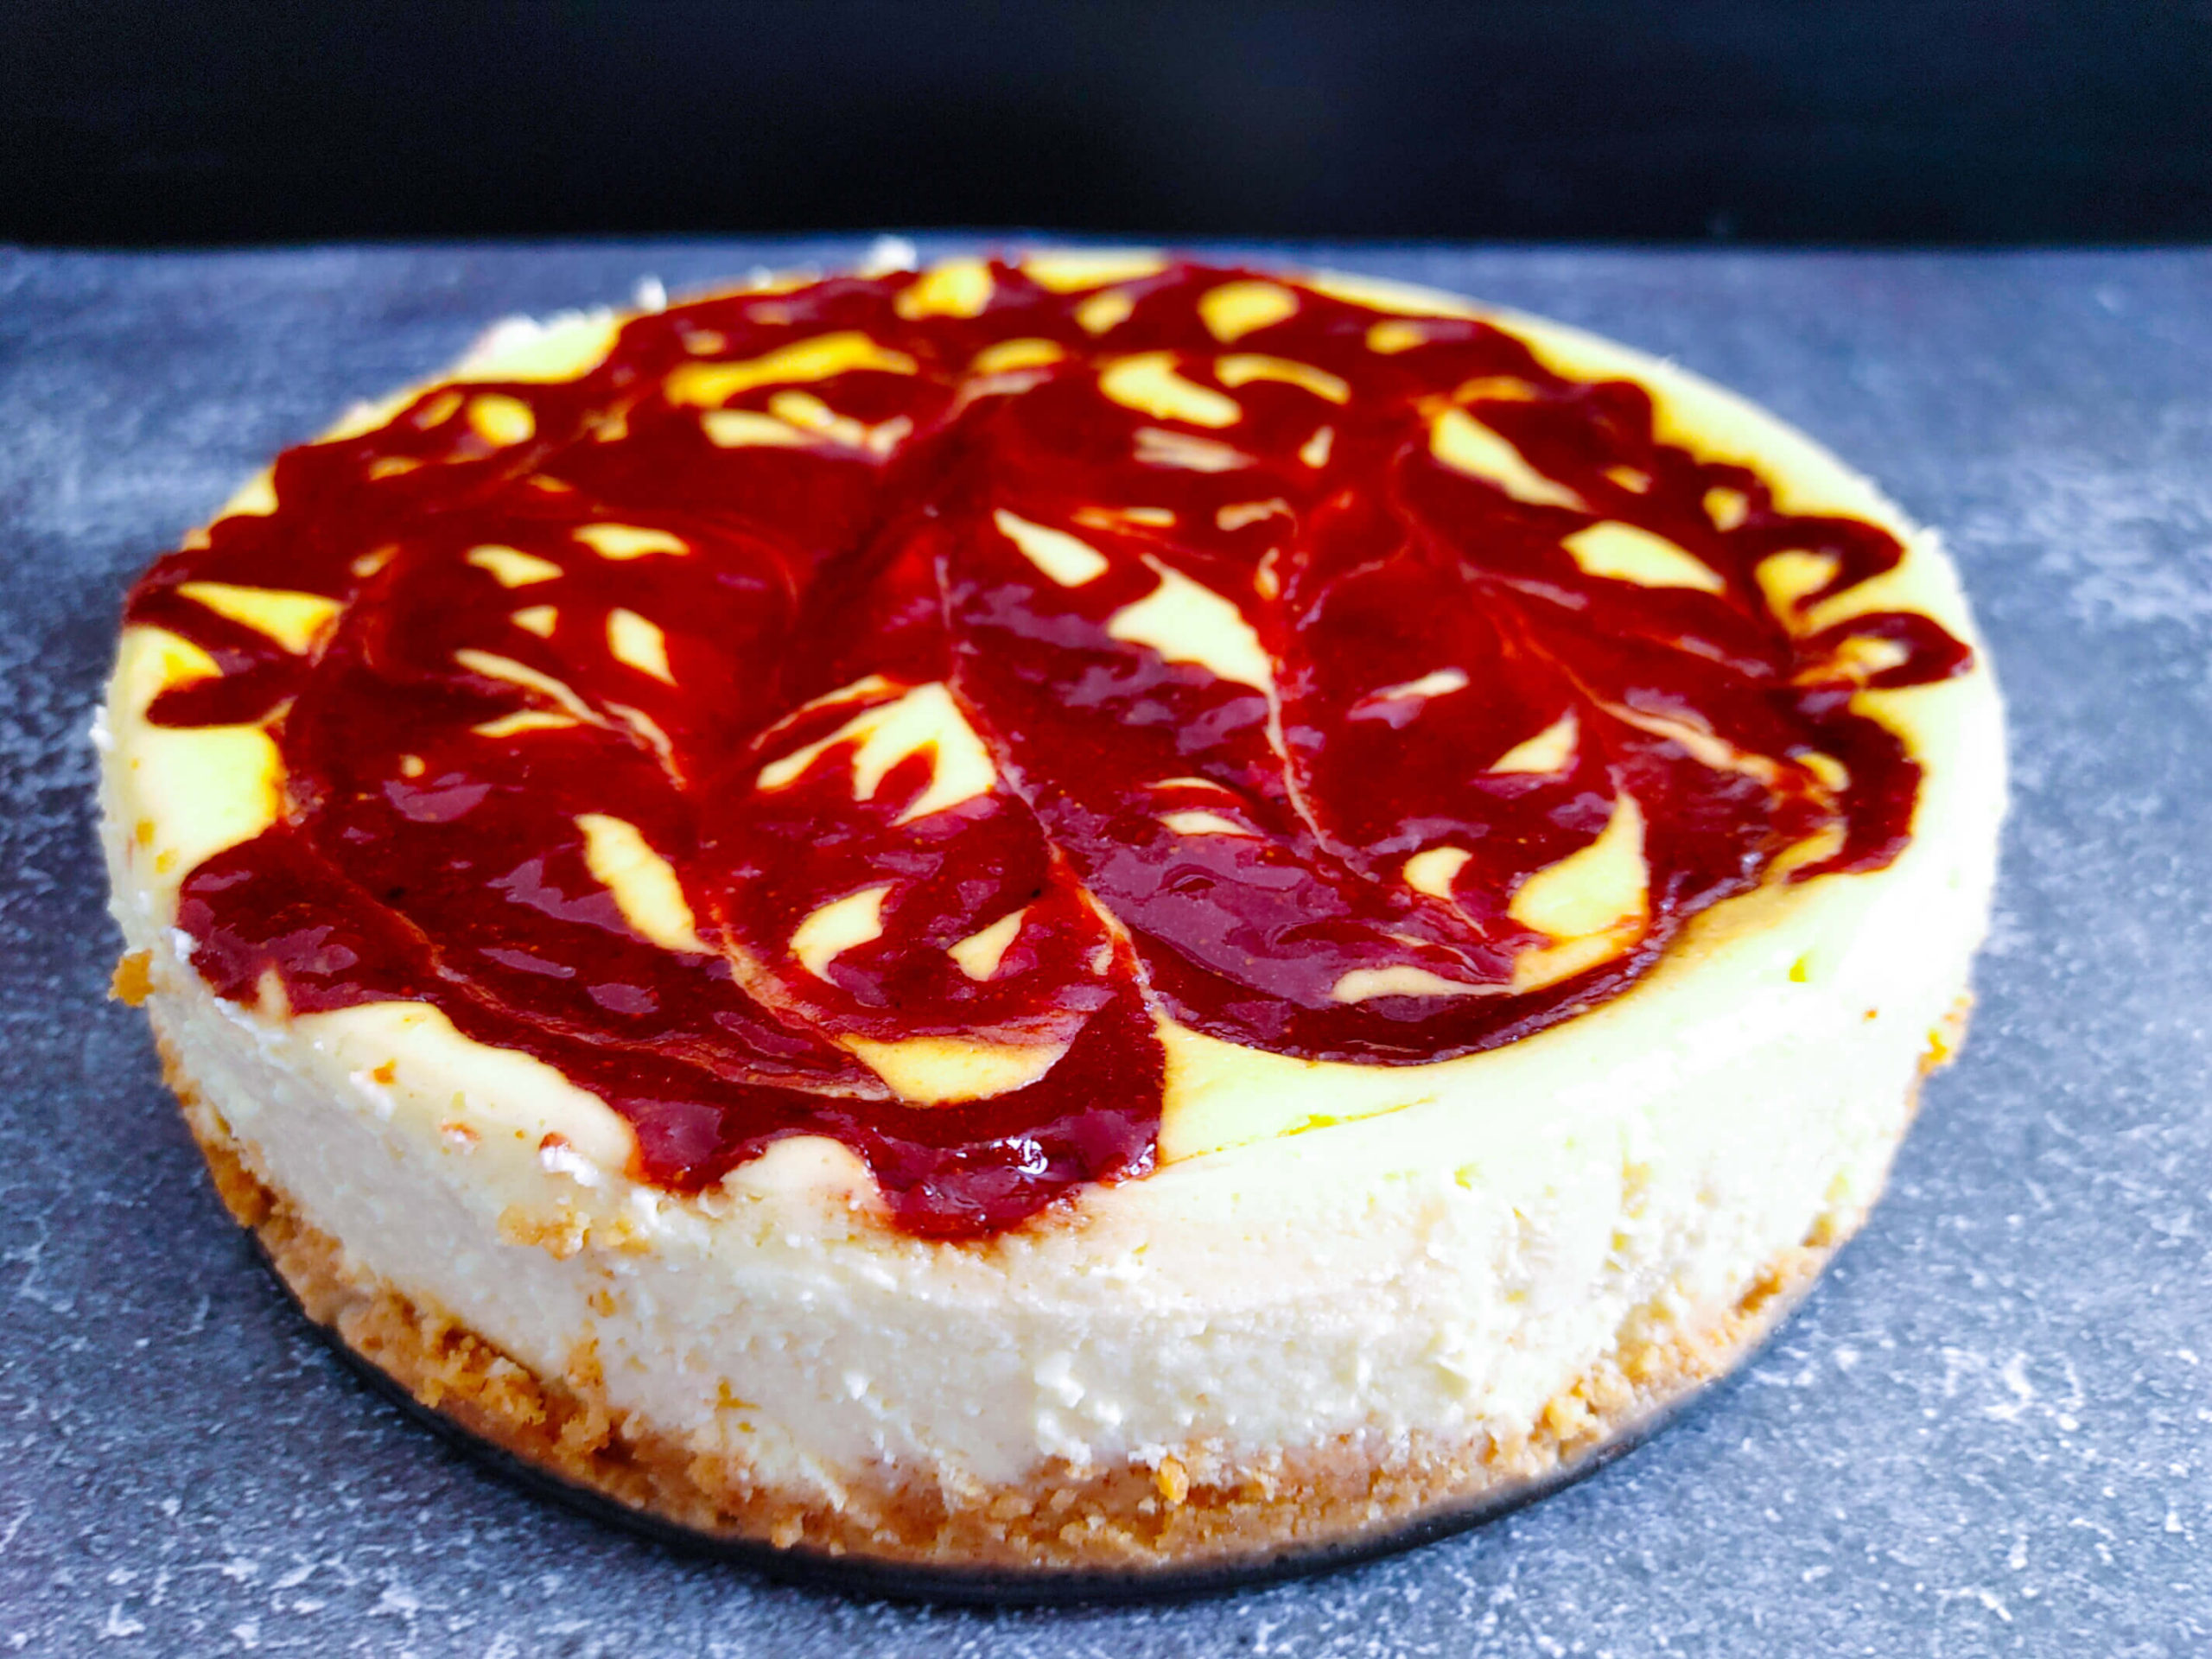 BAKED AND COOLED CHEESECAKE